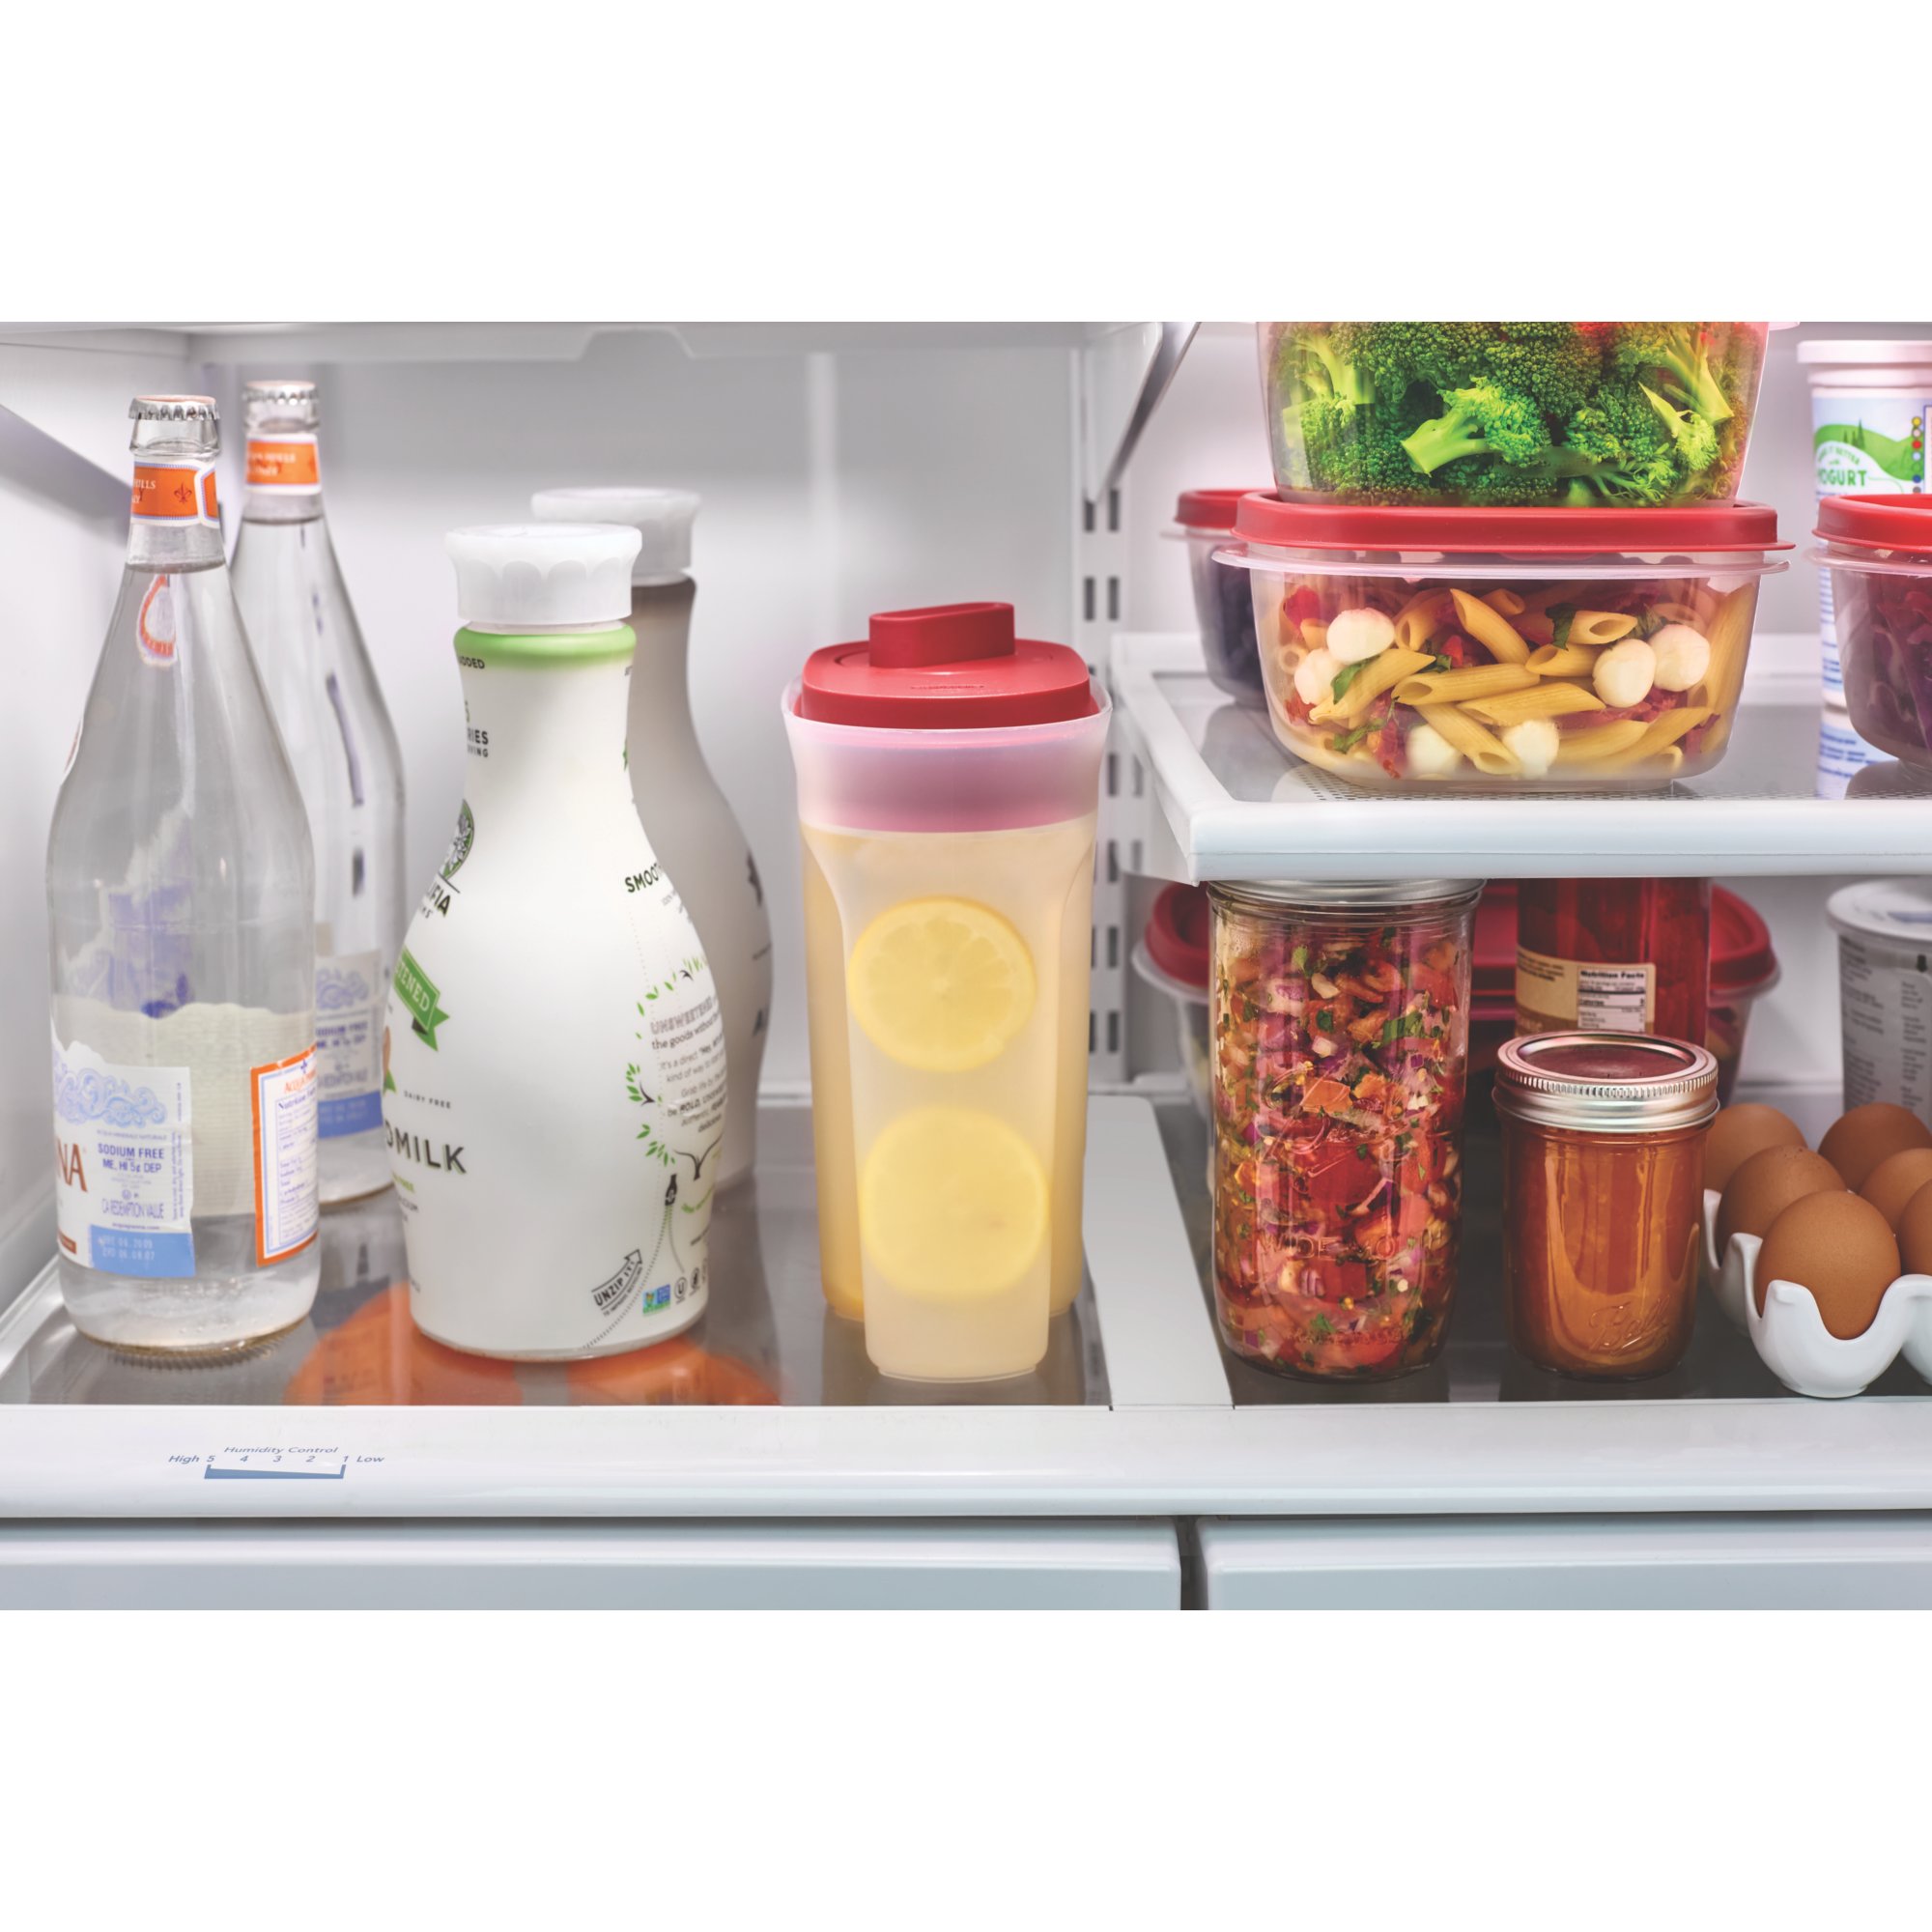 https://s7d9.scene7.com/is/image/NewellRubbermaid/2122589-rubbermaid-food-storage-ss-pitcher-premium-lid-2qt-red-refrigerator-with-food-lifestyle?wid=2000&hei=2000